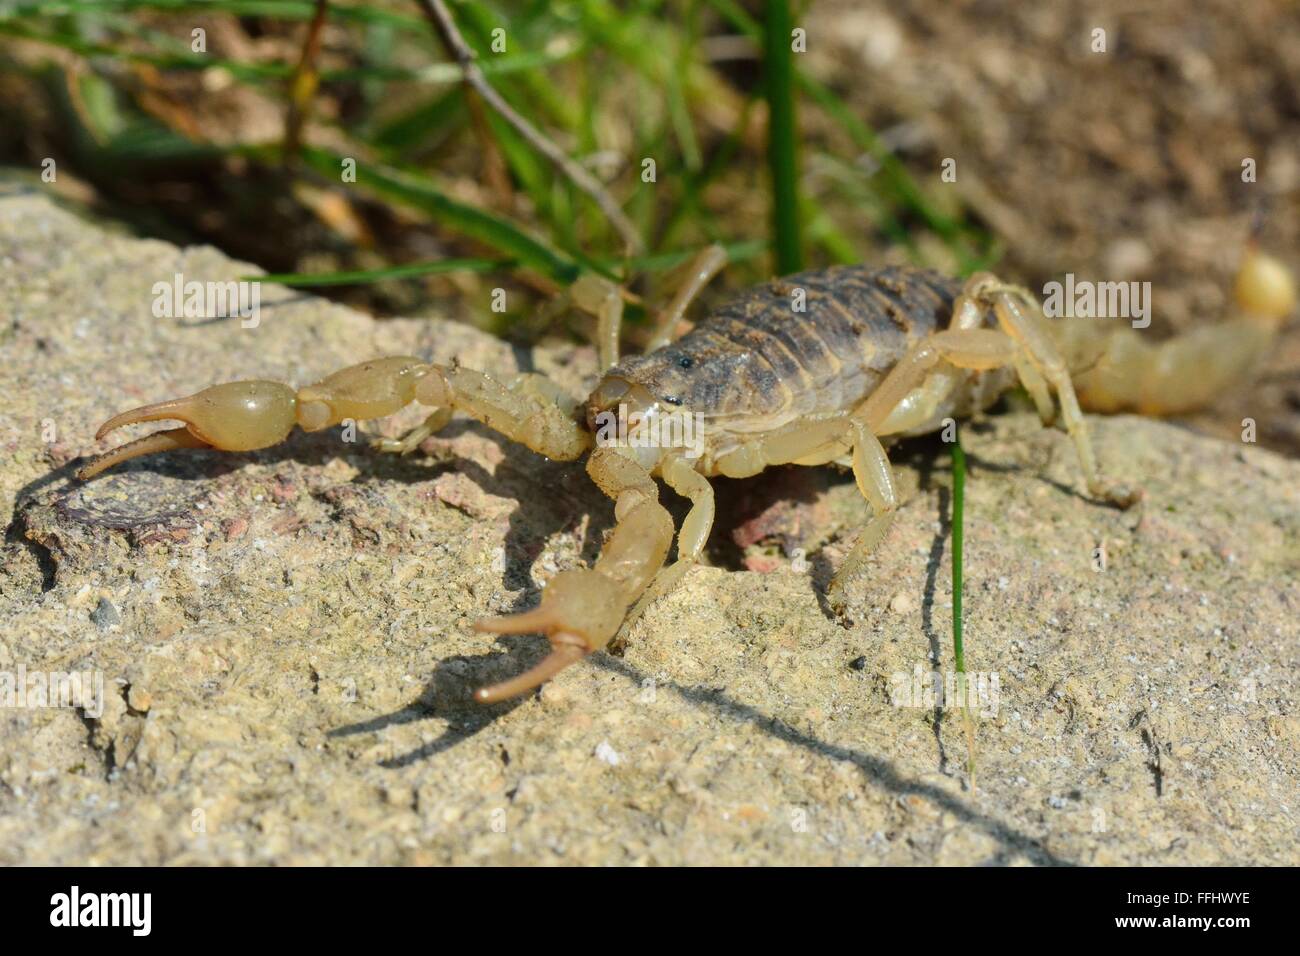 Common yellow scorpion (Buthus occitanus) with pincers open. A scorpion in the family Buthidae, displaying pincers in hills Stock Photo